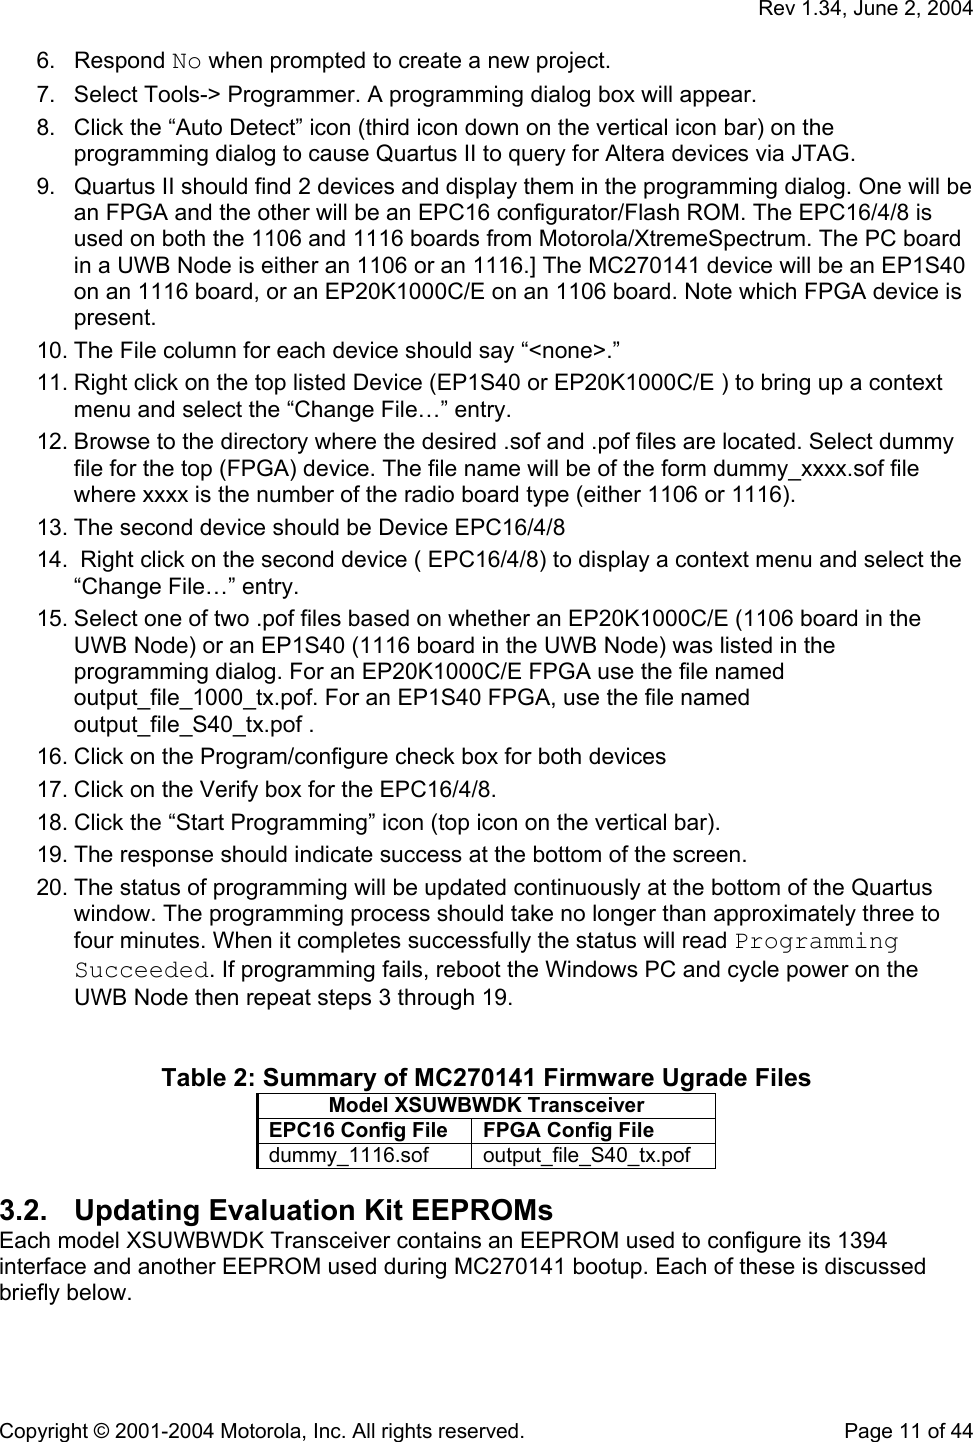   Rev 1.34, June 2, 2004  Copyright © 2001-2004 Motorola, Inc. All rights reserved.    Page 11 of 44 6. Respond No when prompted to create a new project. 7.  Select Tools-&gt; Programmer. A programming dialog box will appear. 8.  Click the “Auto Detect” icon (third icon down on the vertical icon bar) on the programming dialog to cause Quartus II to query for Altera devices via JTAG. 9.  Quartus II should find 2 devices and display them in the programming dialog. One will be an FPGA and the other will be an EPC16 configurator/Flash ROM. The EPC16/4/8 is used on both the 1106 and 1116 boards from Motorola/XtremeSpectrum. The PC board in a UWB Node is either an 1106 or an 1116.] The MC270141 device will be an EP1S40 on an 1116 board, or an EP20K1000C/E on an 1106 board. Note which FPGA device is present. 10. The File column for each device should say “&lt;none&gt;.” 11. Right click on the top listed Device (EP1S40 or EP20K1000C/E ) to bring up a context menu and select the “Change File…” entry.  12. Browse to the directory where the desired .sof and .pof files are located. Select dummy file for the top (FPGA) device. The file name will be of the form dummy_xxxx.sof file where xxxx is the number of the radio board type (either 1106 or 1116).  13. The second device should be Device EPC16/4/8 14.  Right click on the second device ( EPC16/4/8) to display a context menu and select the “Change File…” entry. 15. Select one of two .pof files based on whether an EP20K1000C/E (1106 board in the UWB Node) or an EP1S40 (1116 board in the UWB Node) was listed in the programming dialog. For an EP20K1000C/E FPGA use the file named output_file_1000_tx.pof. For an EP1S40 FPGA, use the file named output_file_S40_tx.pof .  16. Click on the Program/configure check box for both devices 17. Click on the Verify box for the EPC16/4/8. 18. Click the “Start Programming” icon (top icon on the vertical bar).  19. The response should indicate success at the bottom of the screen.  20. The status of programming will be updated continuously at the bottom of the Quartus window. The programming process should take no longer than approximately three to four minutes. When it completes successfully the status will read Programming Succeeded. If programming fails, reboot the Windows PC and cycle power on the UWB Node then repeat steps 3 through 19.    Table 2: Summary of MC270141 Firmware Ugrade Files Model XSUWBWDK Transceiver EPC16 Config File  FPGA Config File dummy_1116.sof output_file_S40_tx.pof 3.2.  Updating Evaluation Kit EEPROMs Each model XSUWBWDK Transceiver contains an EEPROM used to configure its 1394 interface and another EEPROM used during MC270141 bootup. Each of these is discussed briefly below. 